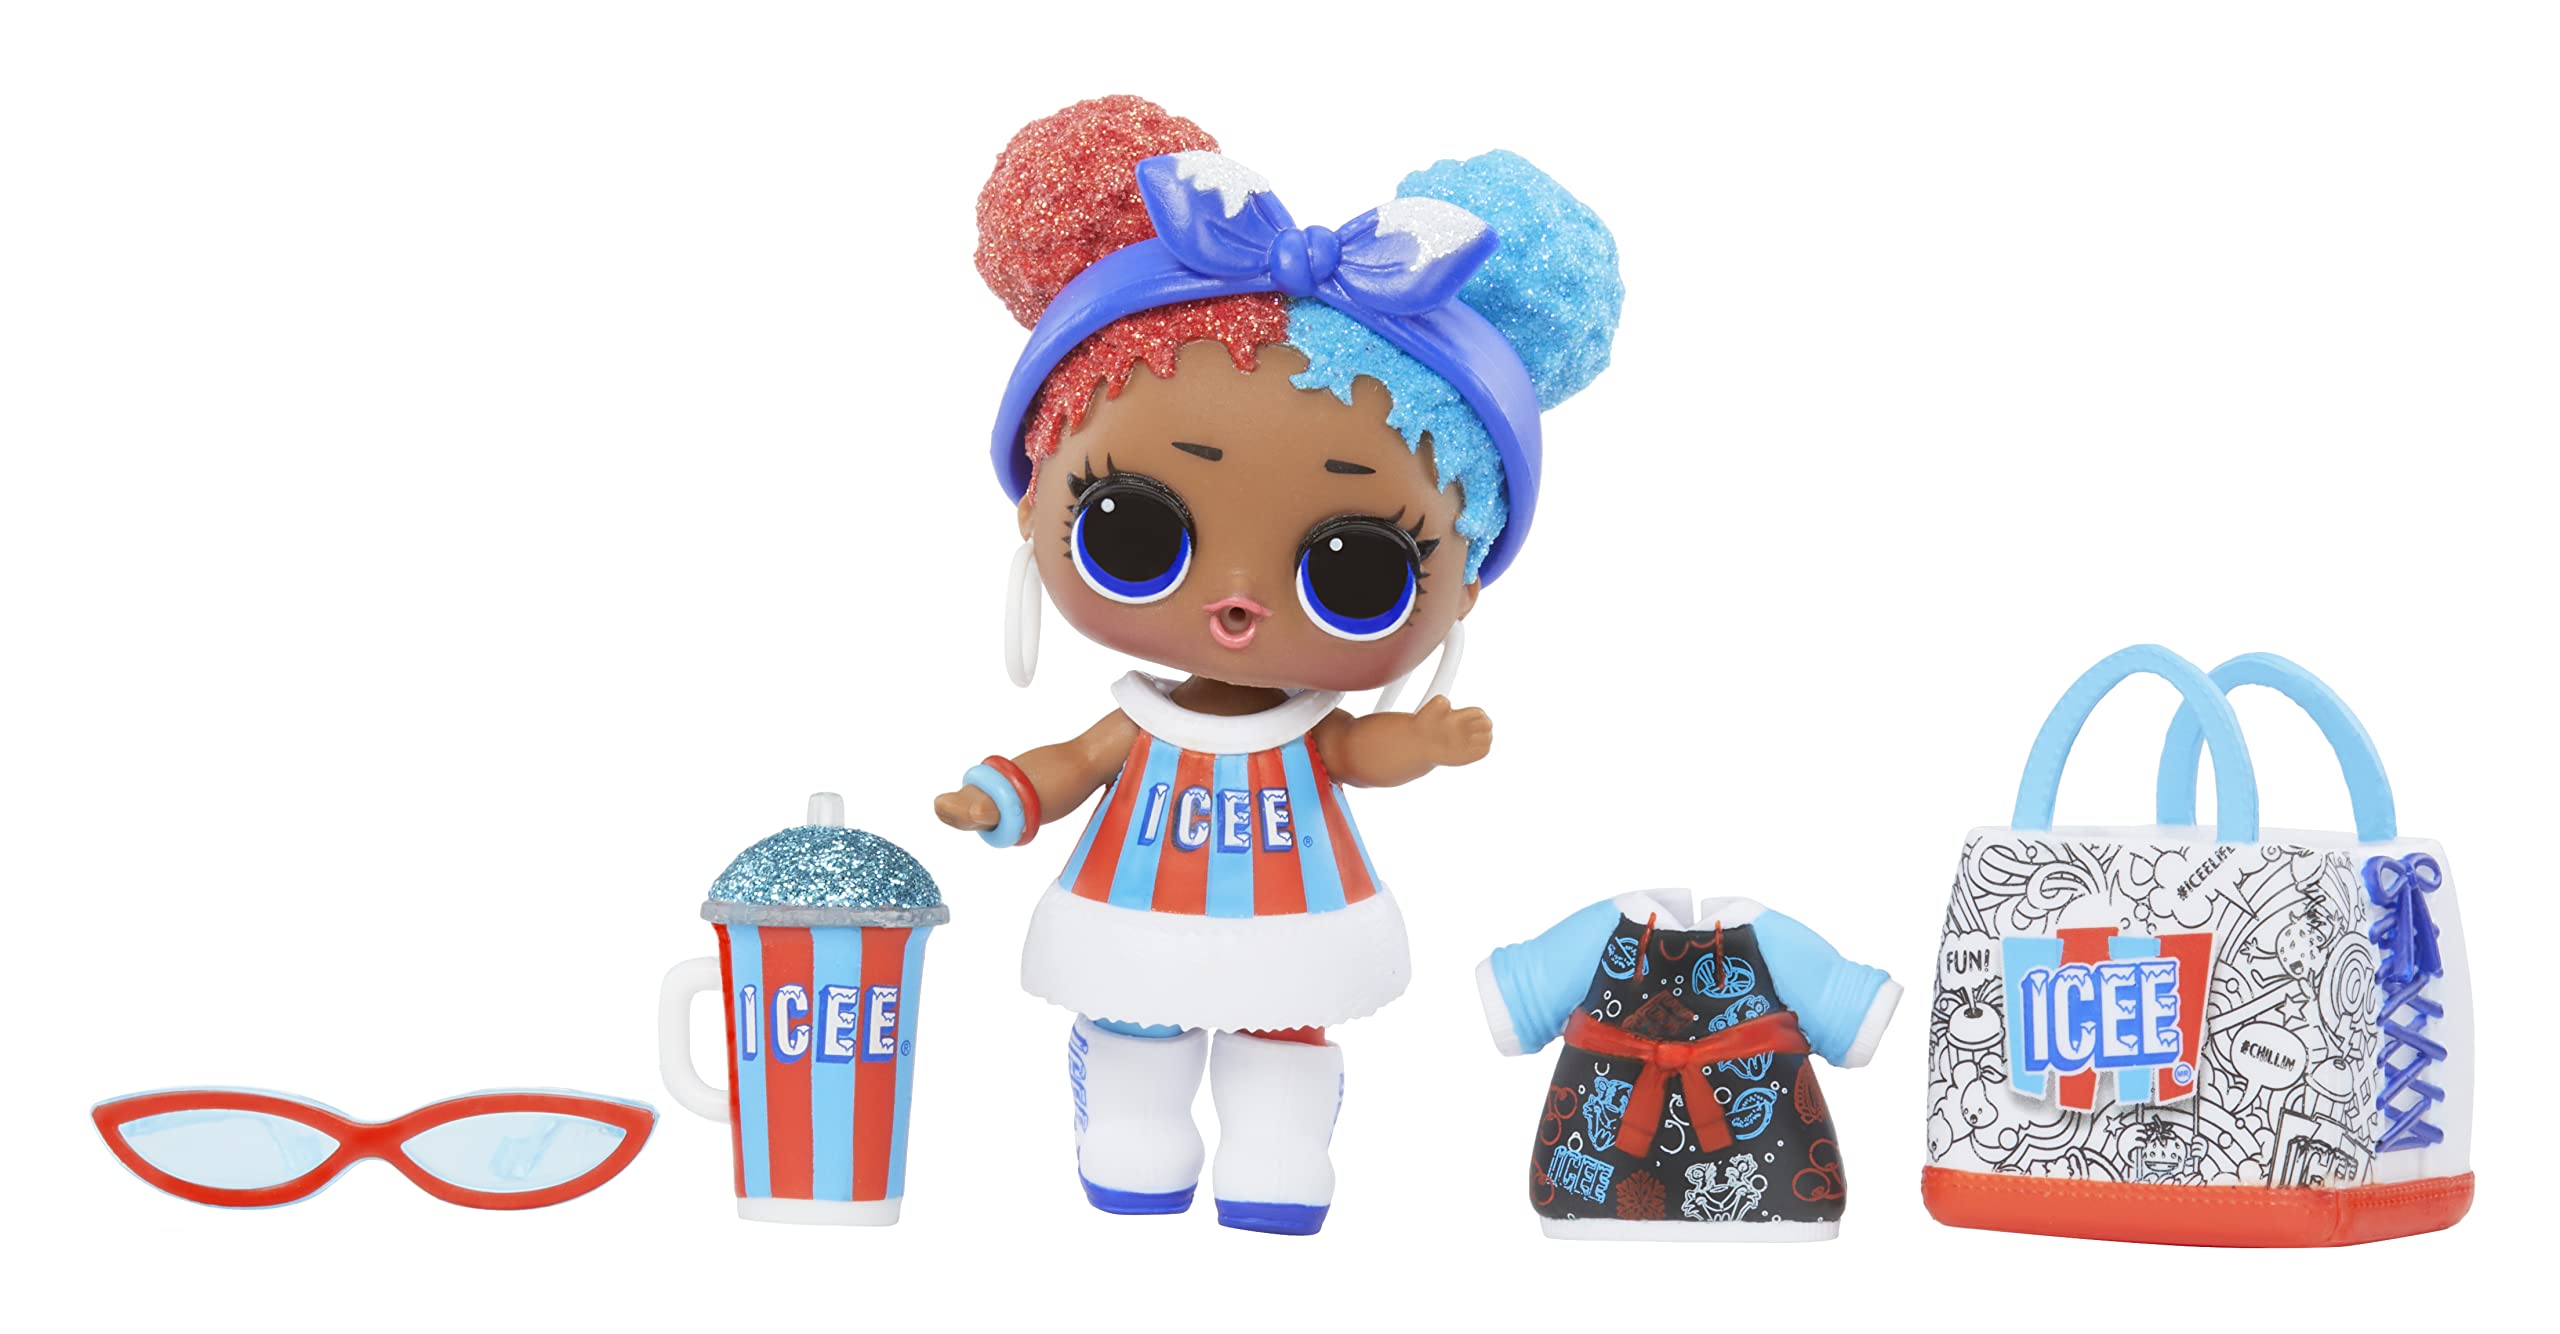 LOL Surprise! Loves Mini Sweets Series 2 with 7 Surprises, Accessories, Limited Edition Doll, Candy Theme, Collectible Doll- Great Gift for Girls&Boys Age 4+